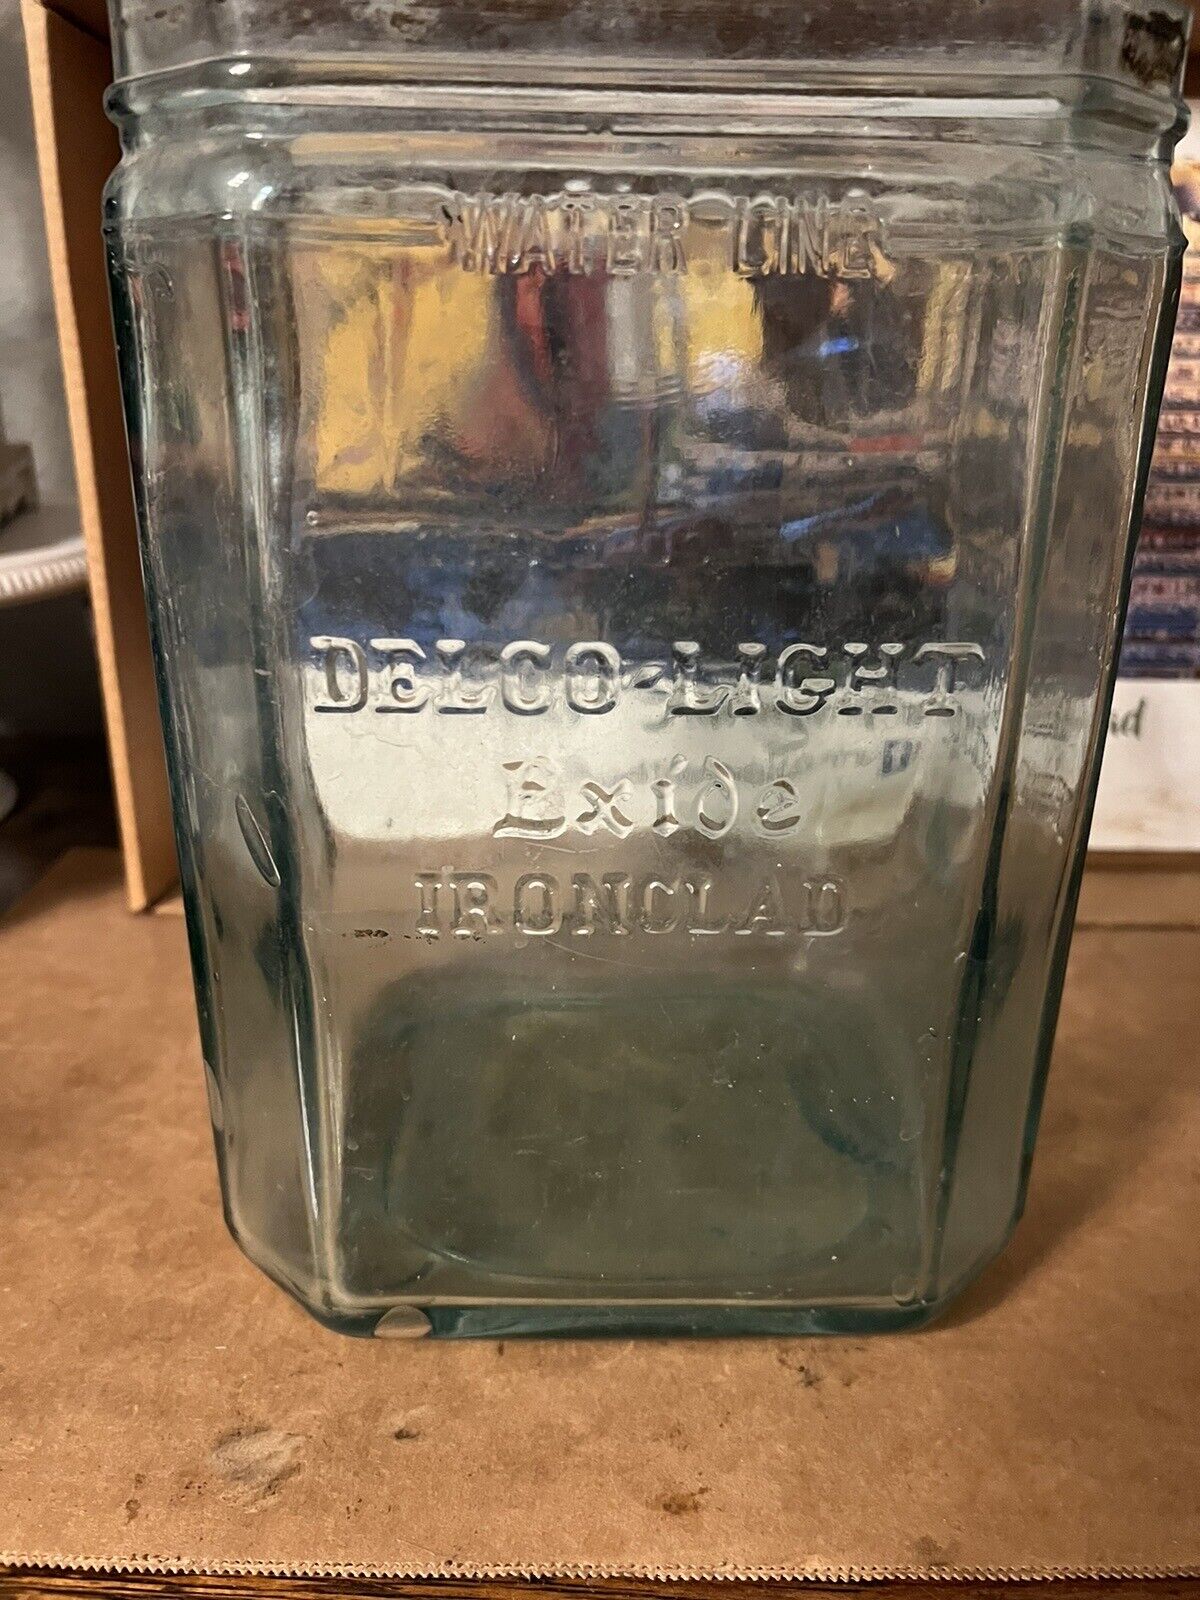 EXIDE Delco light ironclad Industrial Antique USA Clear-green Glass Battery Jar